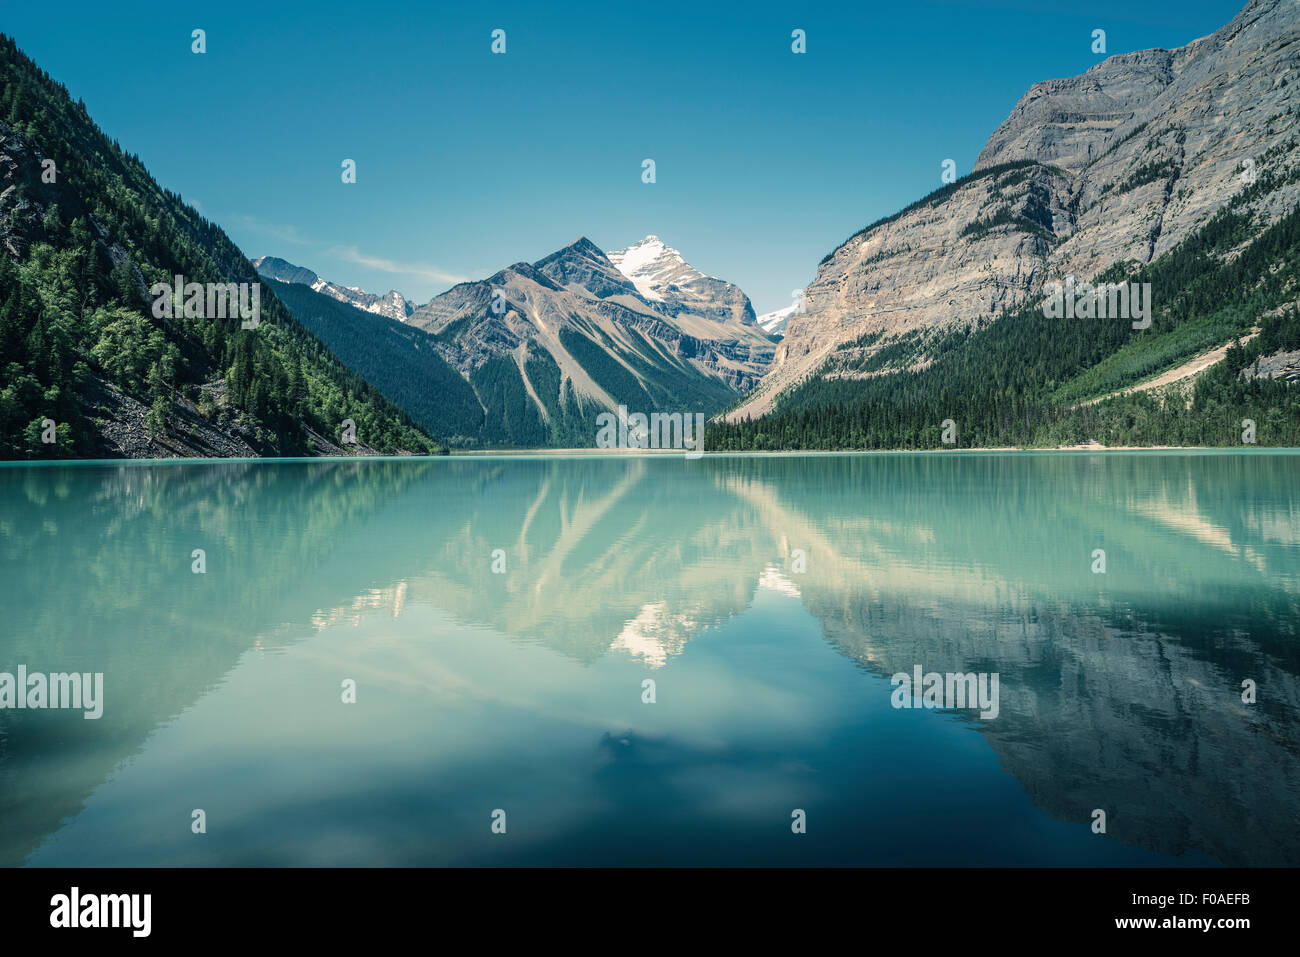 View of lake, forests and snow capped mountain, British Columbia, Canada Stock Photo